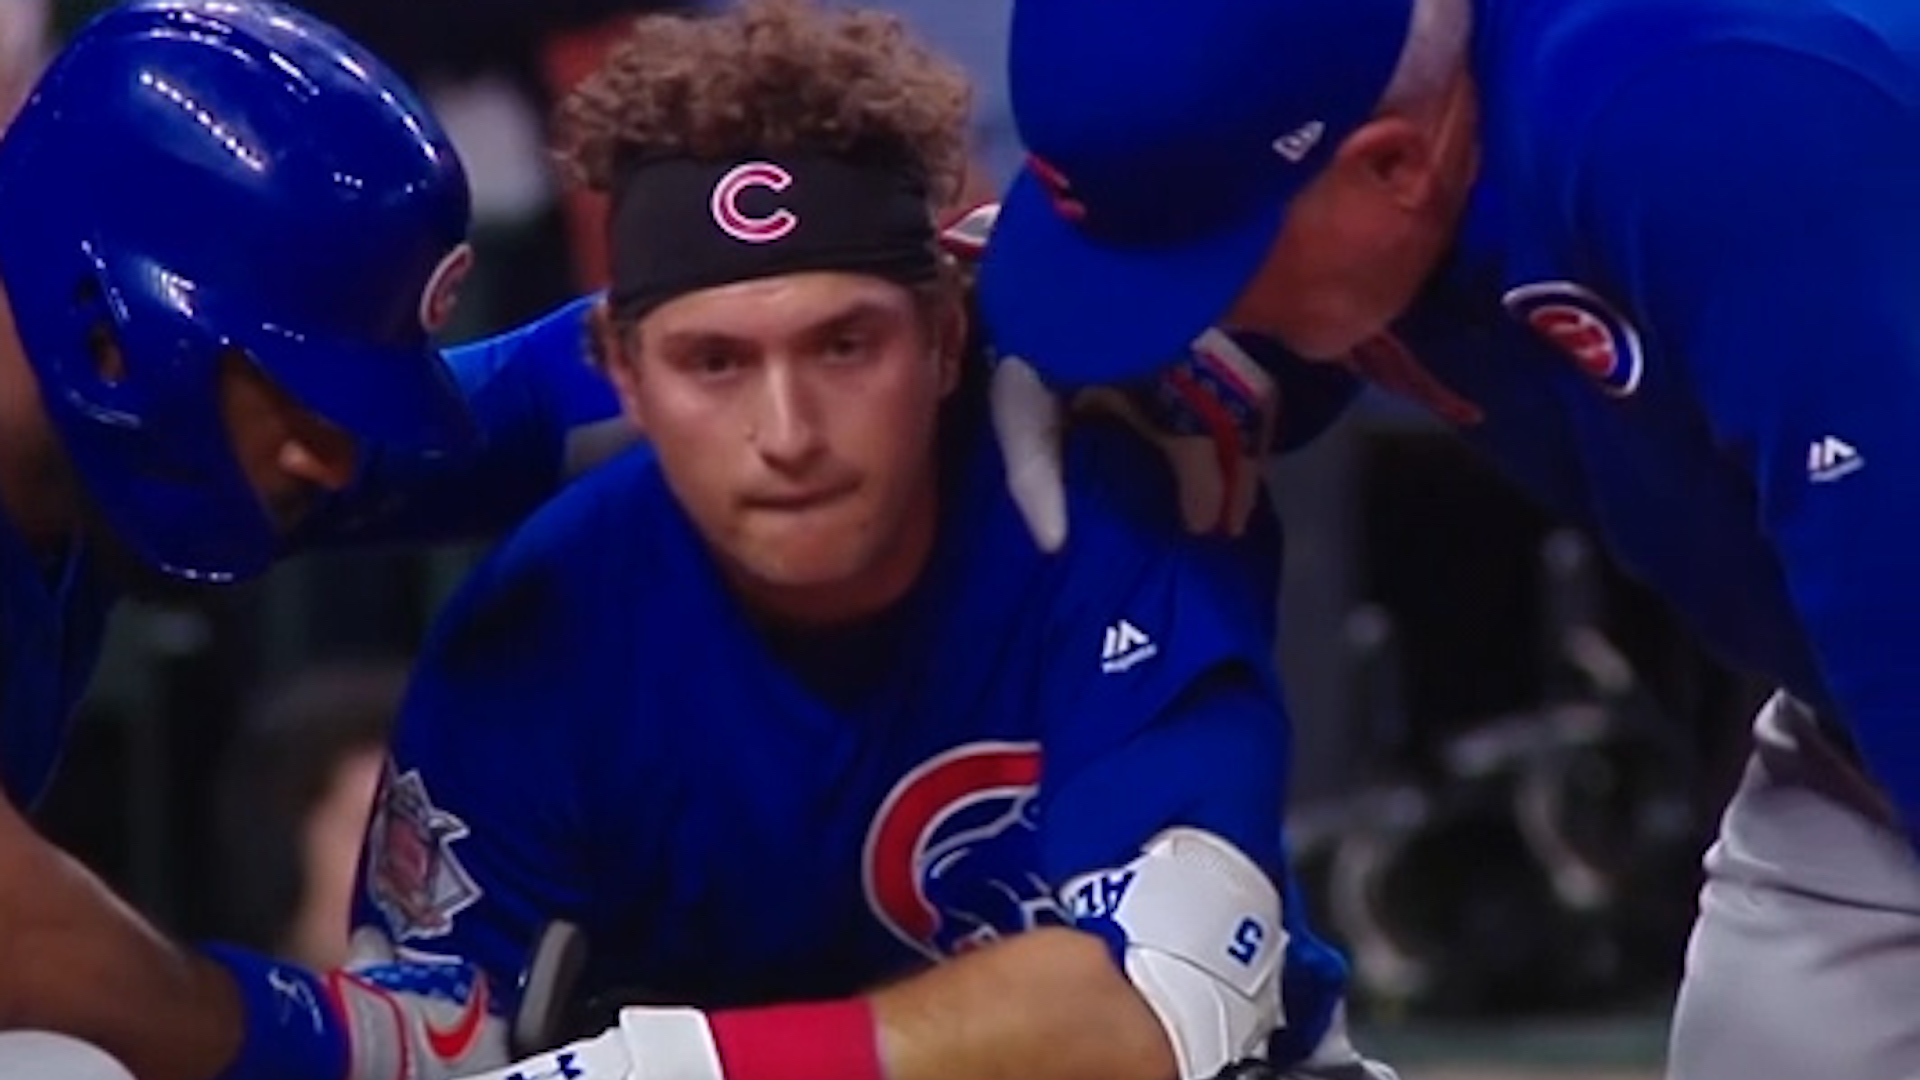 A foul ball hit by Chicago Cubs' Albert Almora Jr. injures a child